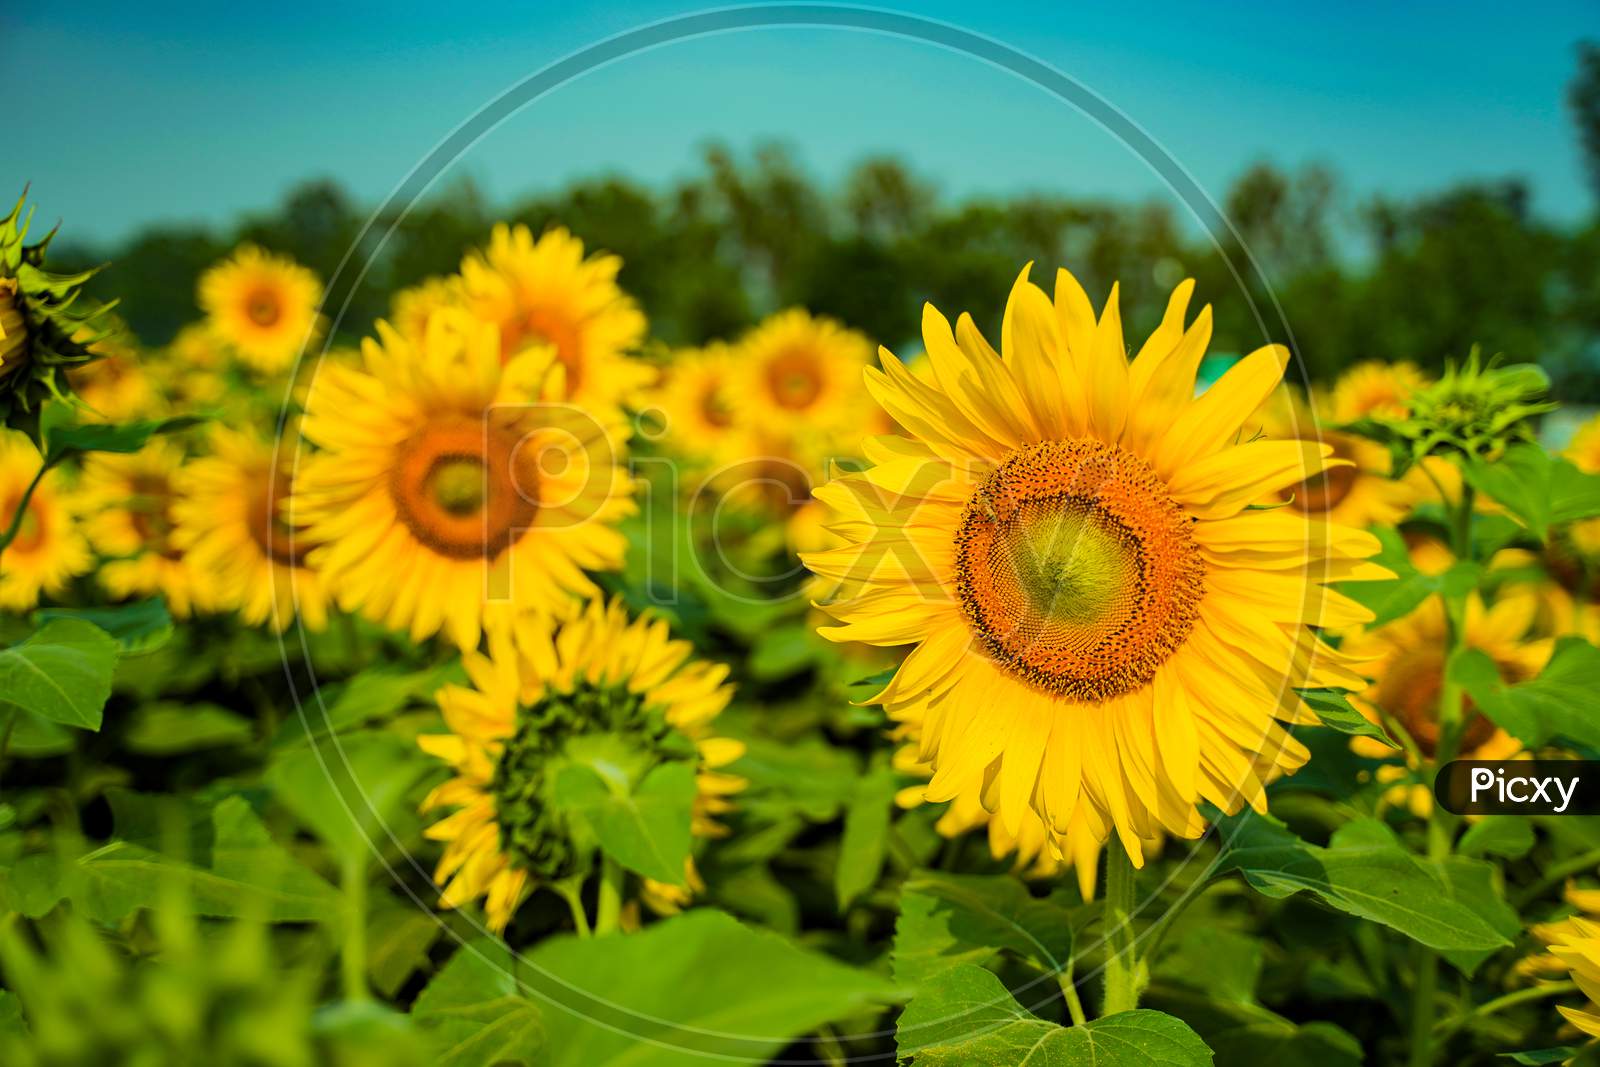 sunflowers in a field with sky